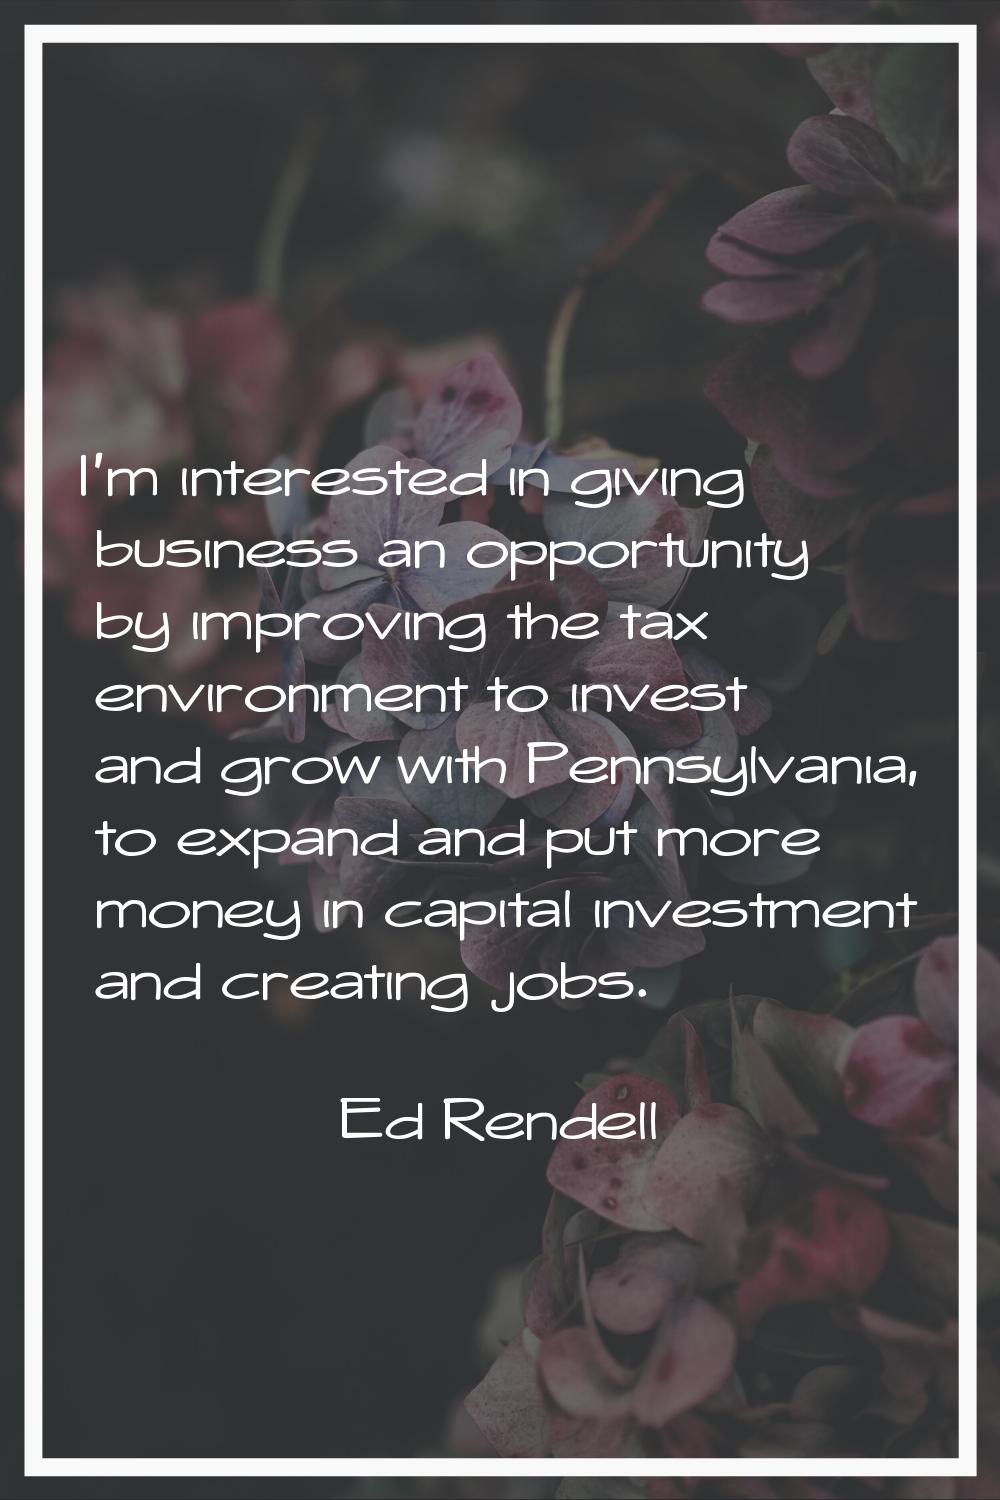 I'm interested in giving business an opportunity by improving the tax environment to invest and gro